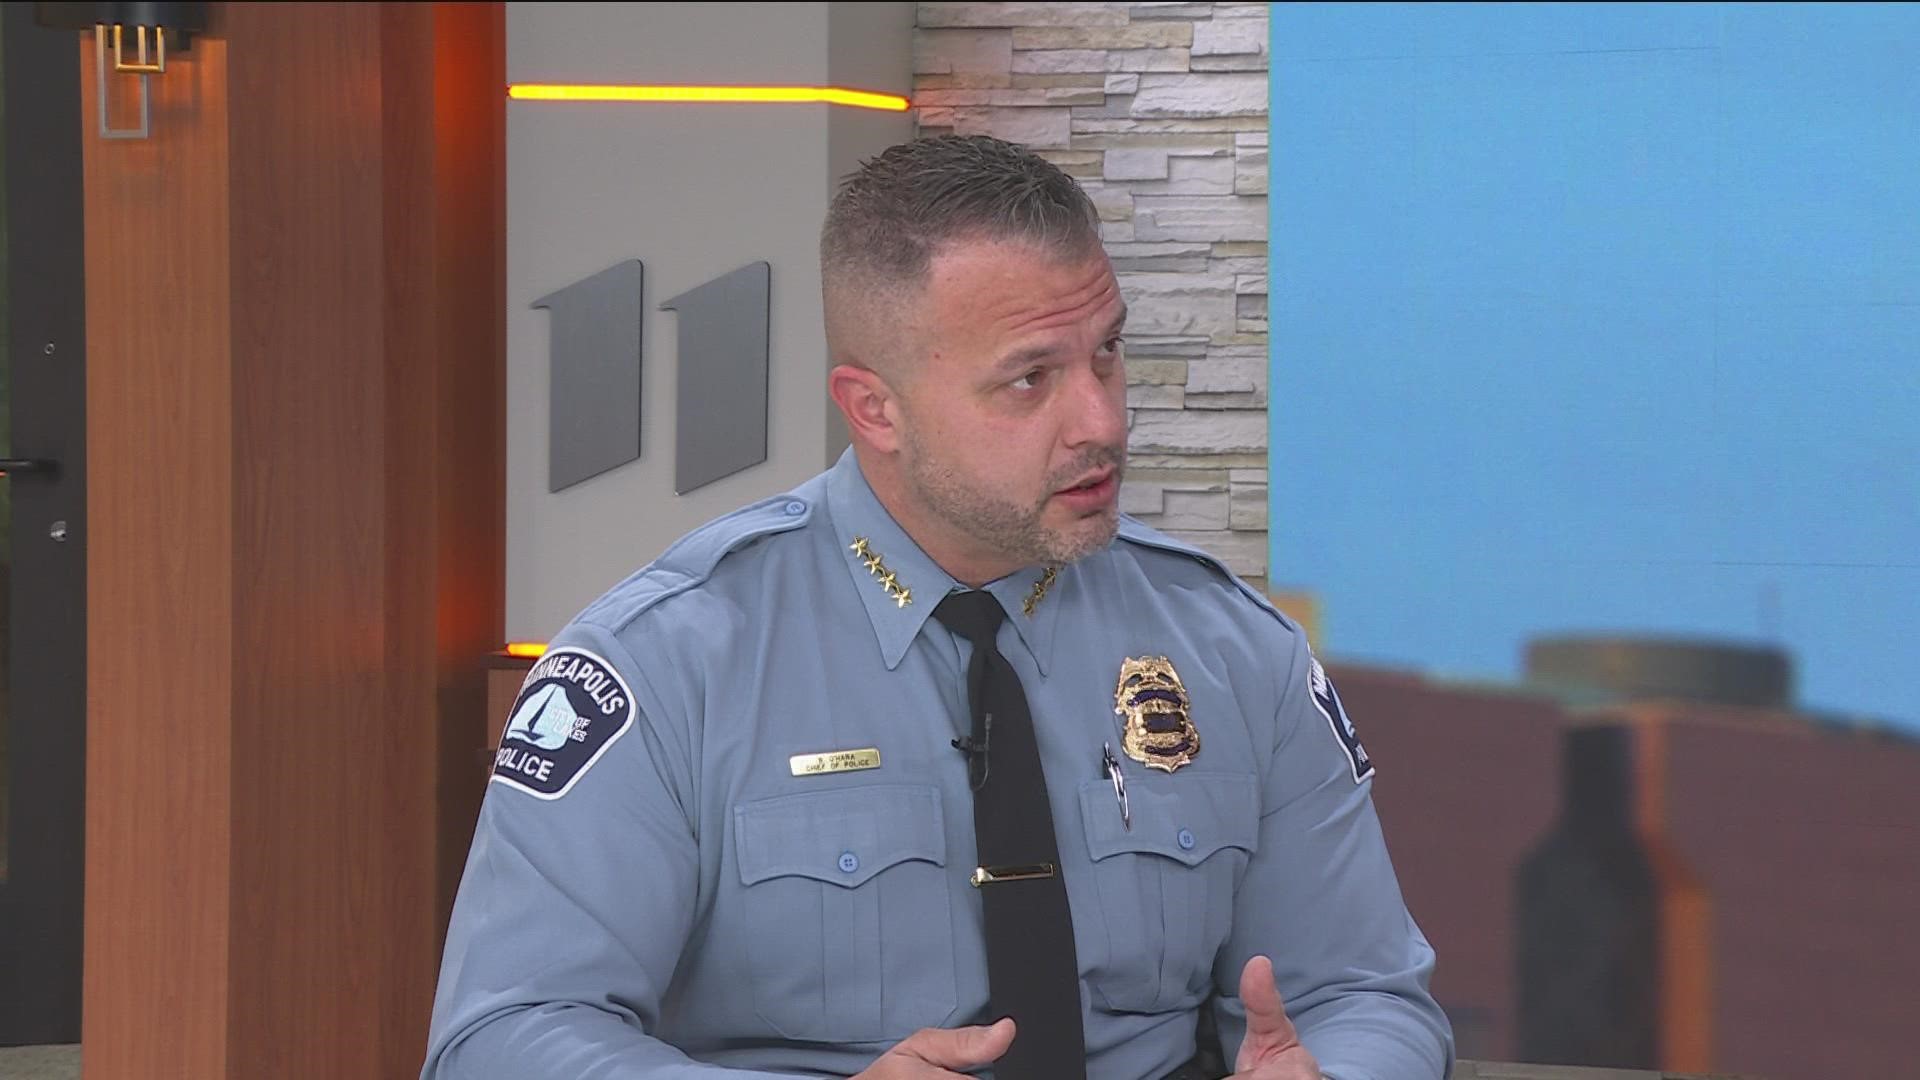 O'Hara discussed his first days on the job, and his plans for the Minneapolis Police Department.